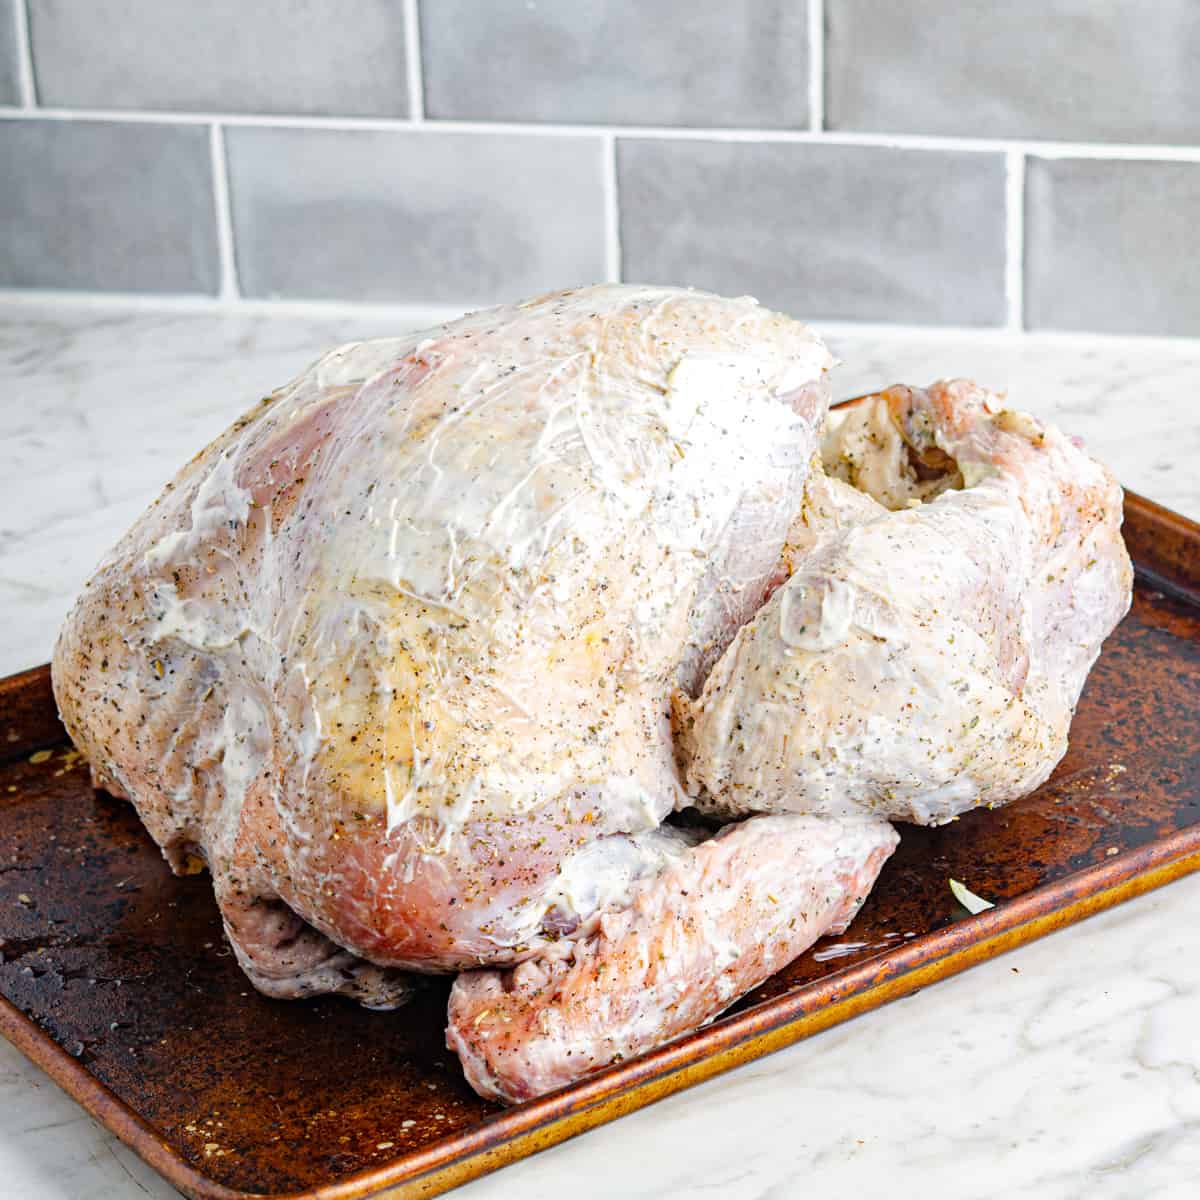 A raw dry brined turkey covered in mayo on a tray